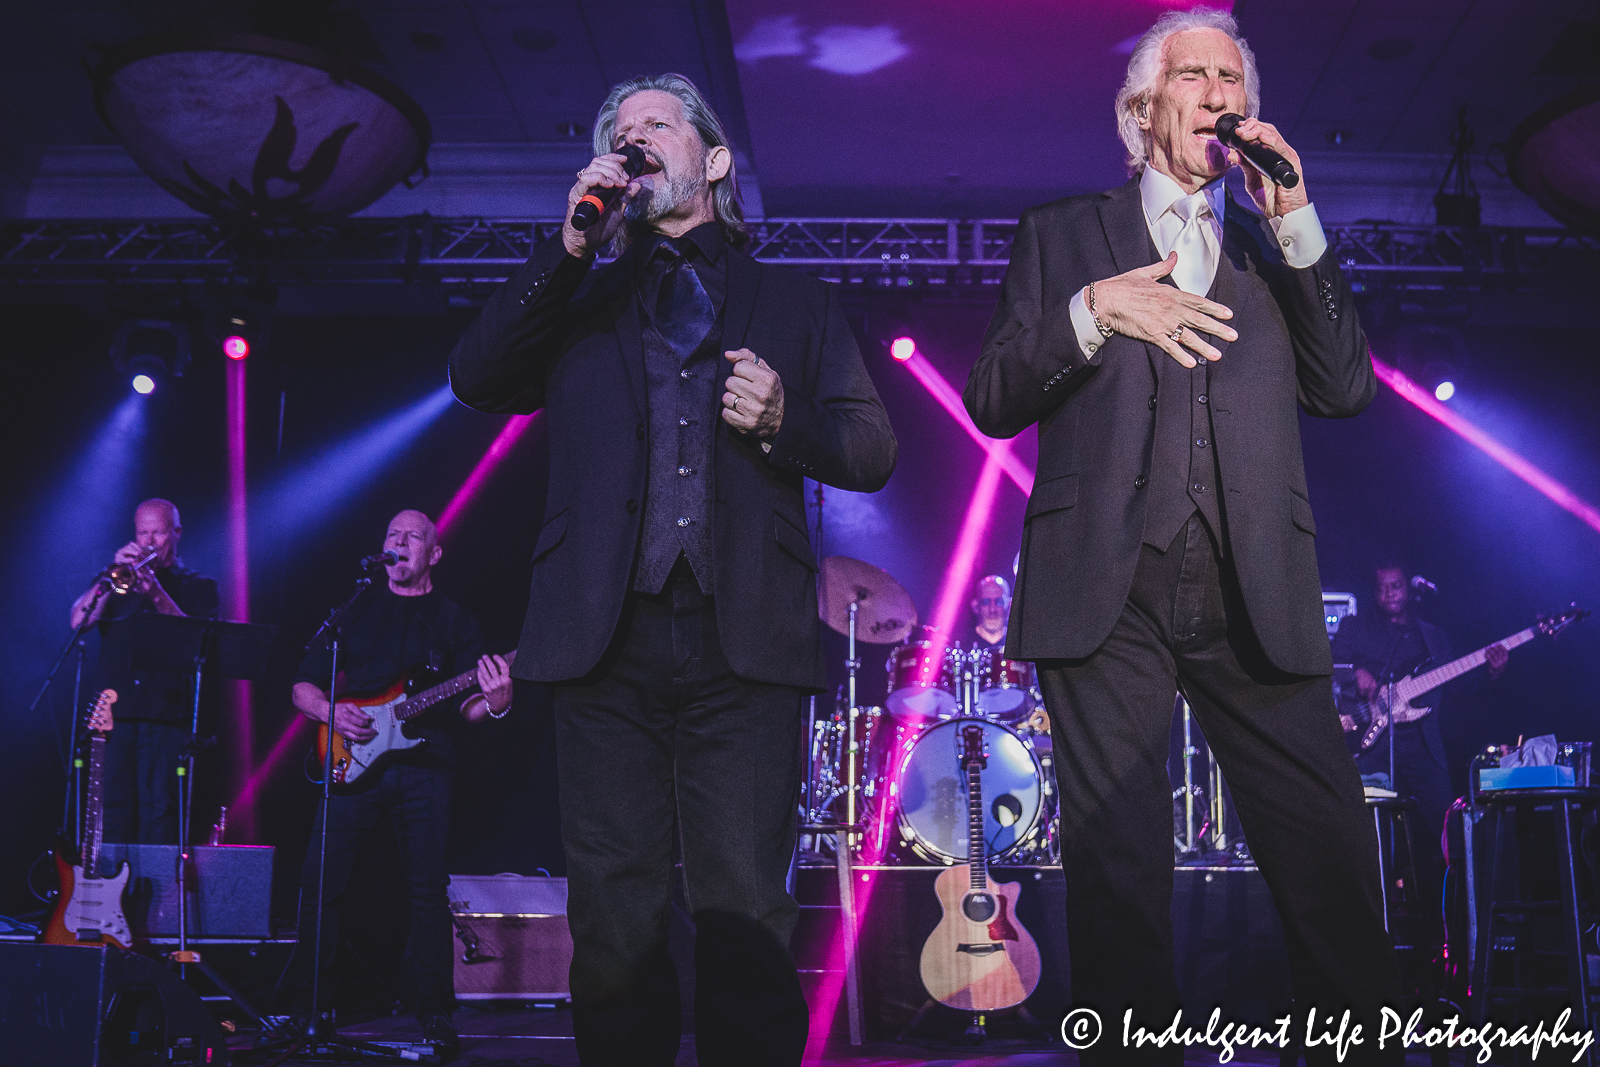 Bill Medley and Bucky Heard performing together as The Righteous Brothers at Prairie Band Casino in Mayetta, KS on June 29, 2023.